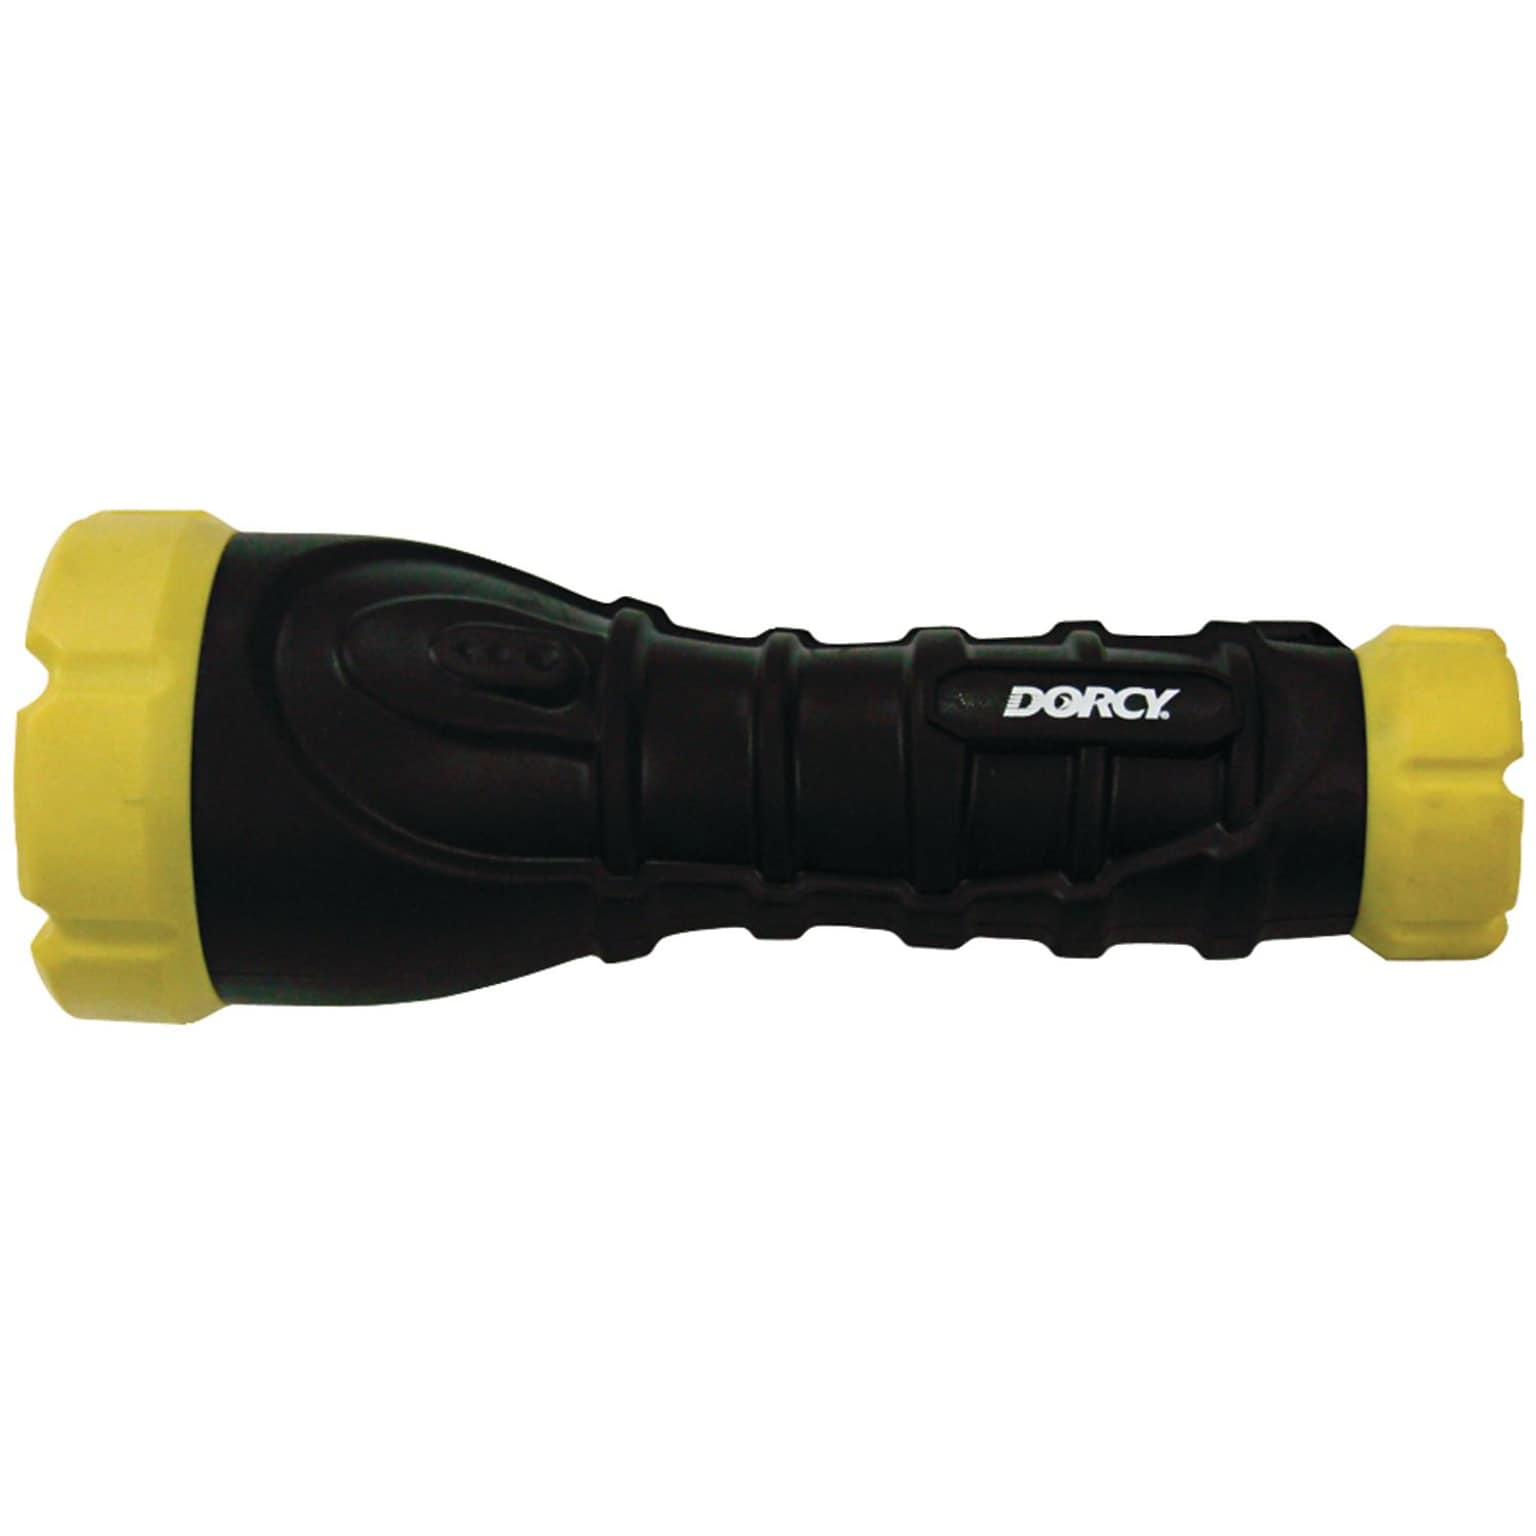 Dorcy 6 Hour 180 Lumens LED TPE Rubber Flashlight, Assorted Colors (DCY412968)